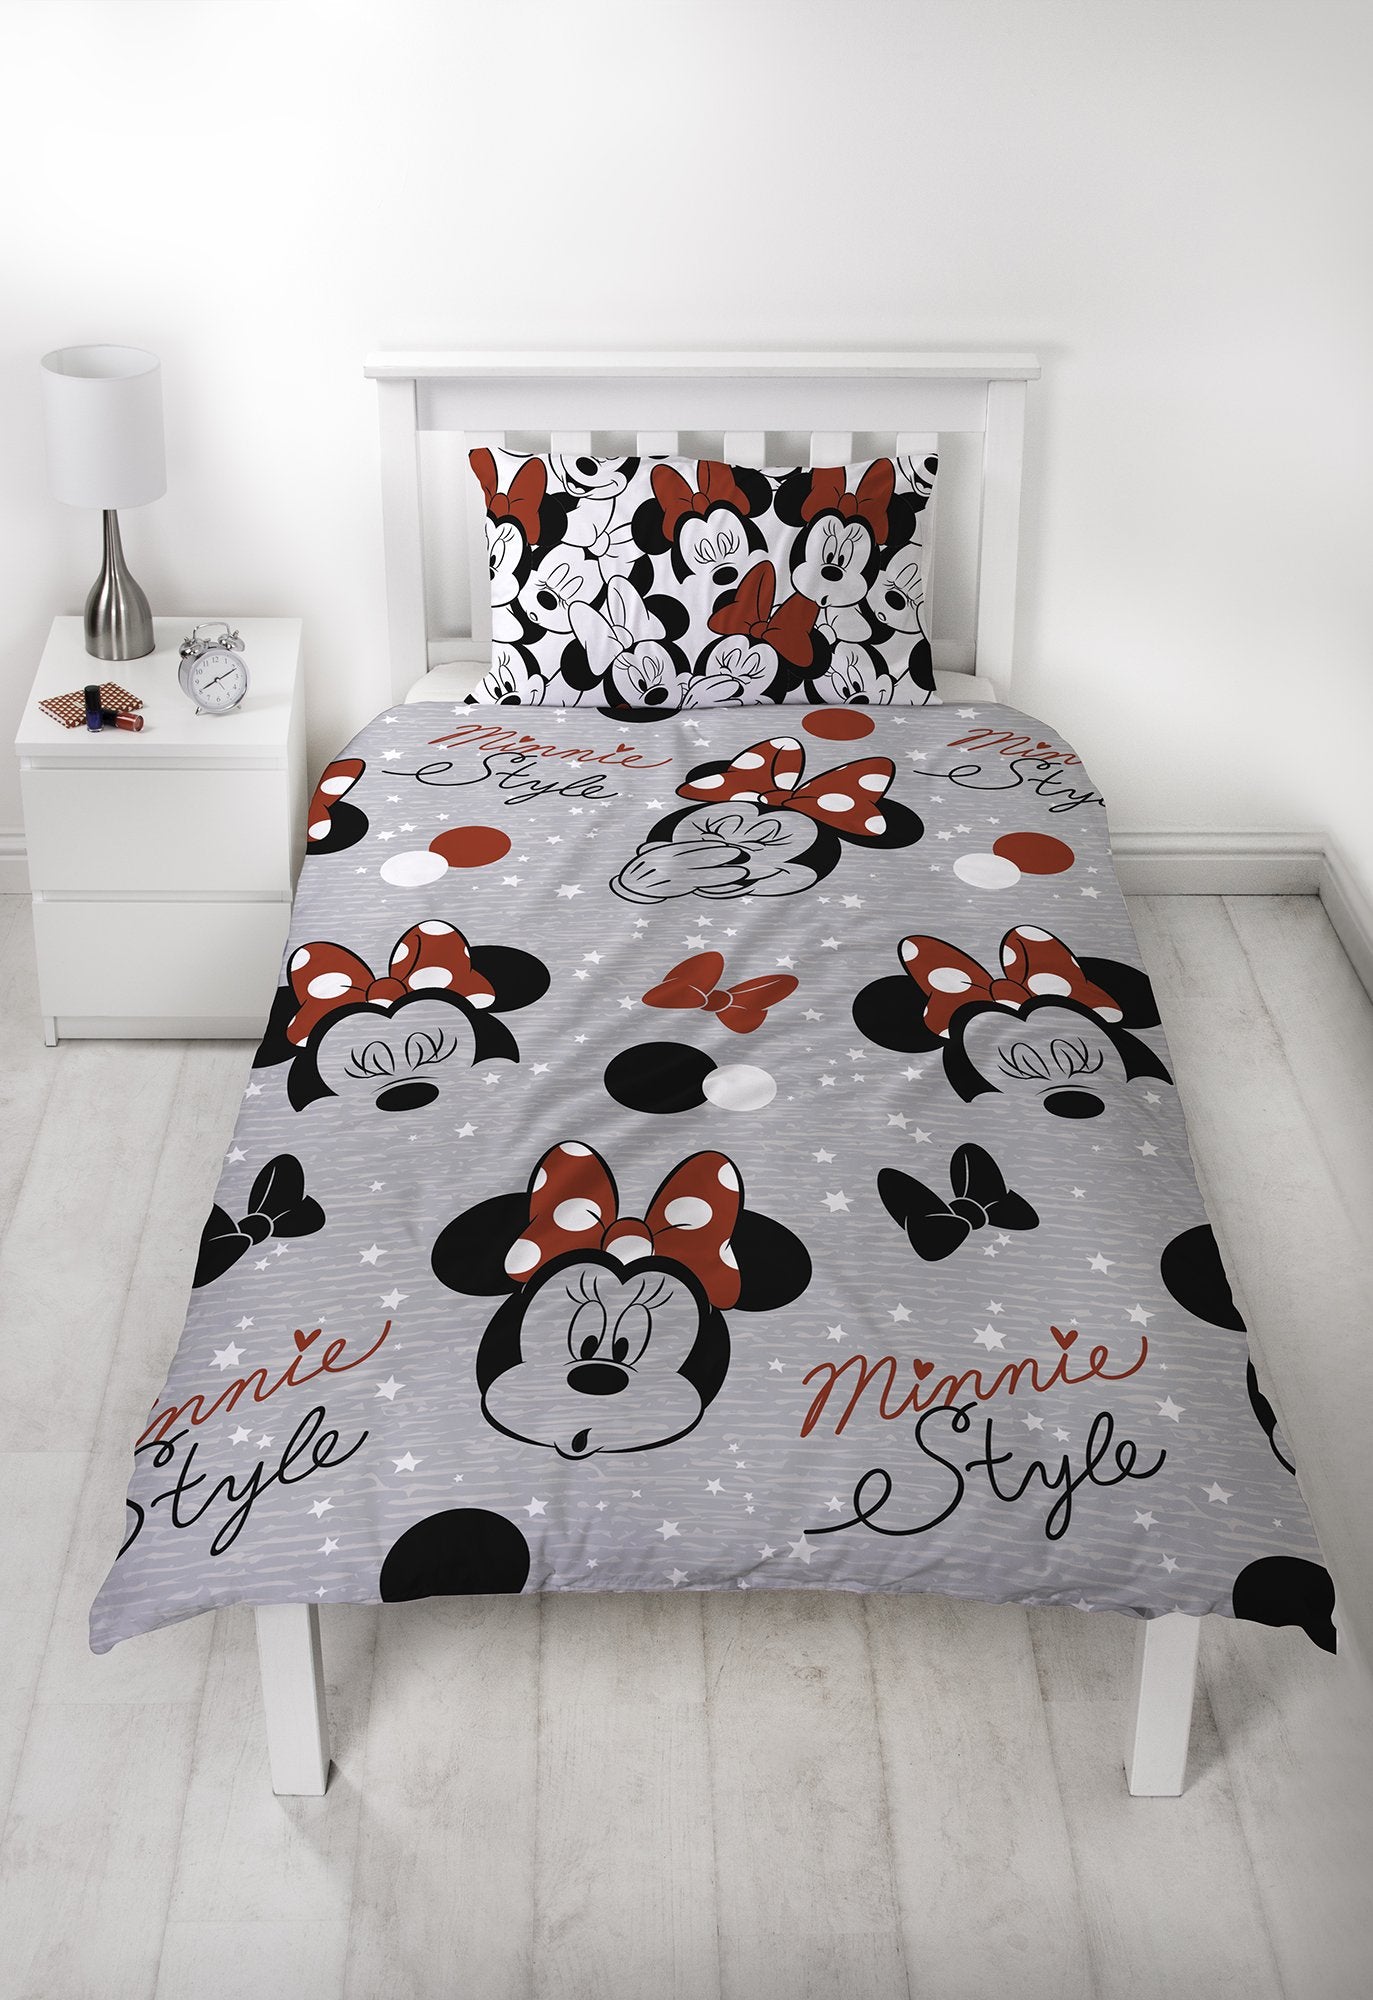 Disney Minnie Mouse Grey Single Duvet Cover | Reversible Cute Two Sided Design | Kids Bedding Set Includes Matching Pillow Case